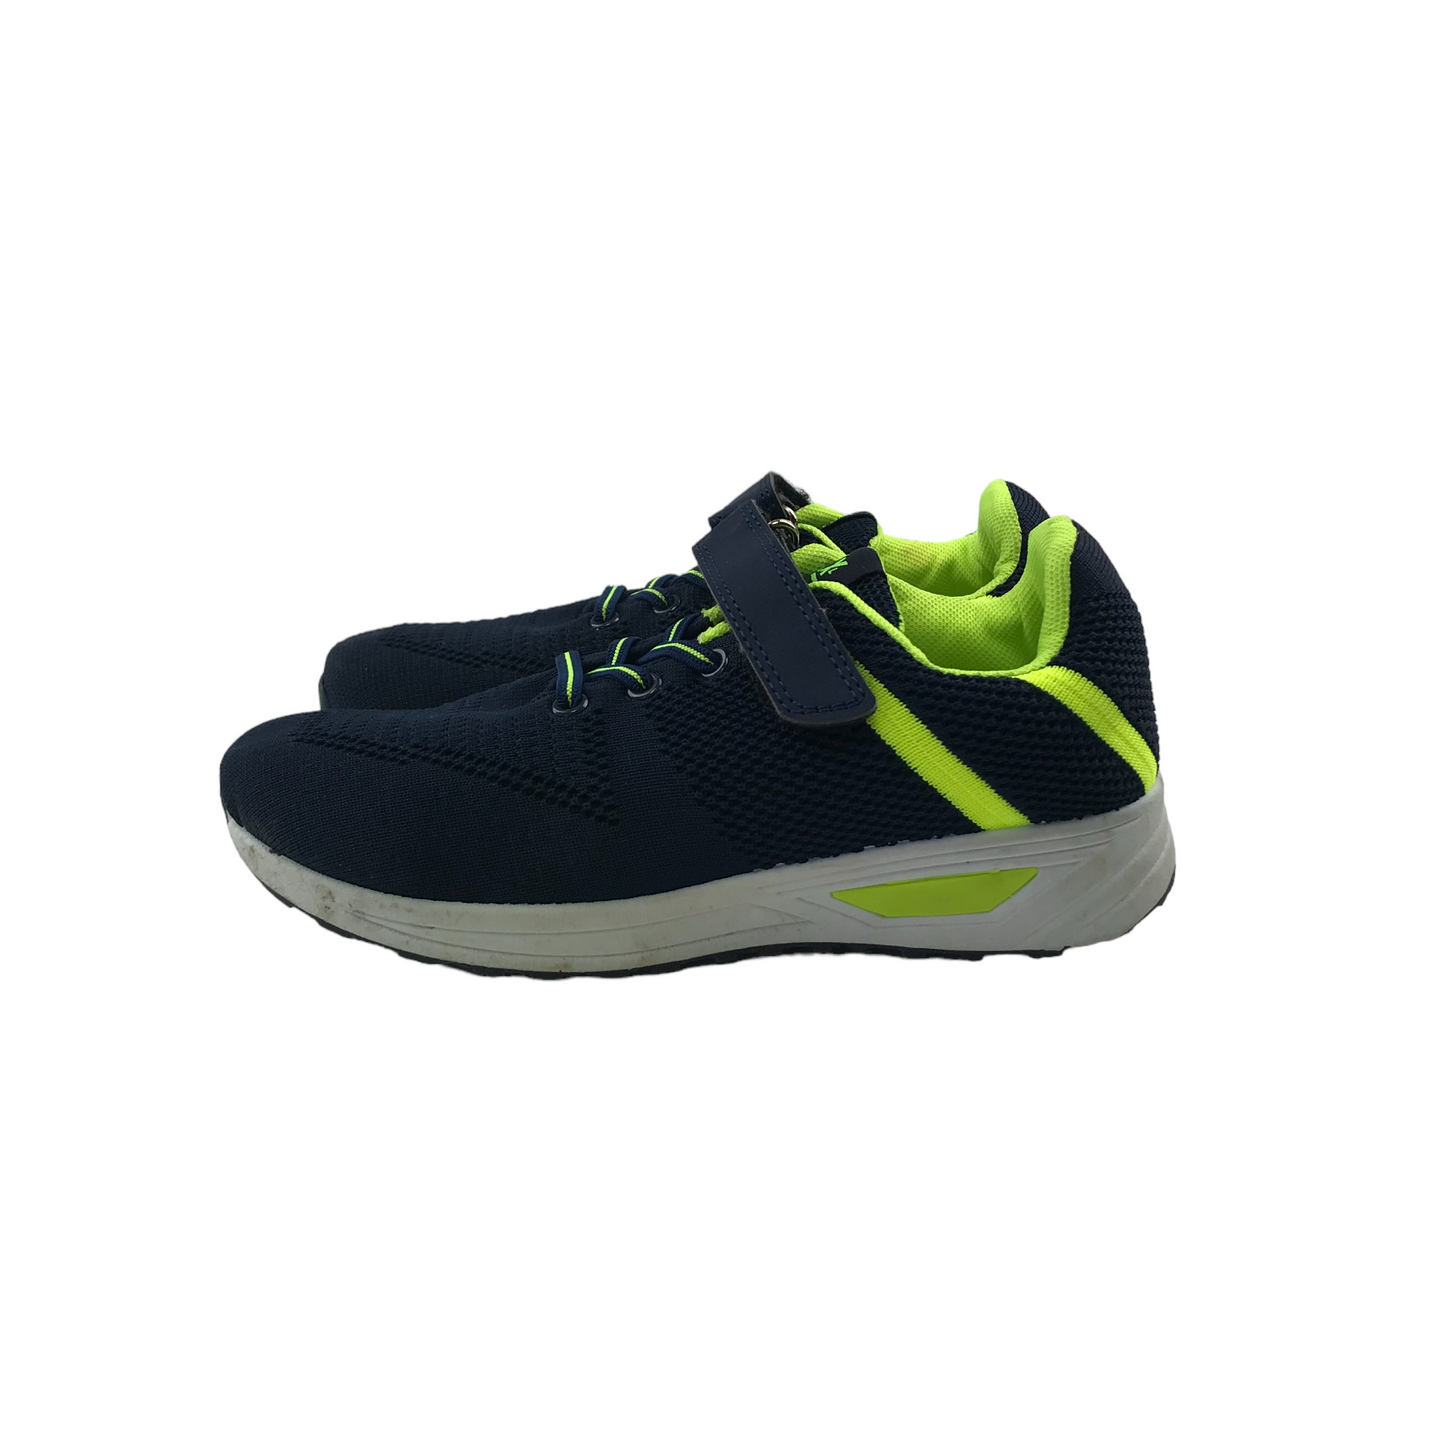 XL Trainers Shoe Size 2 Navy Breathable Trainers